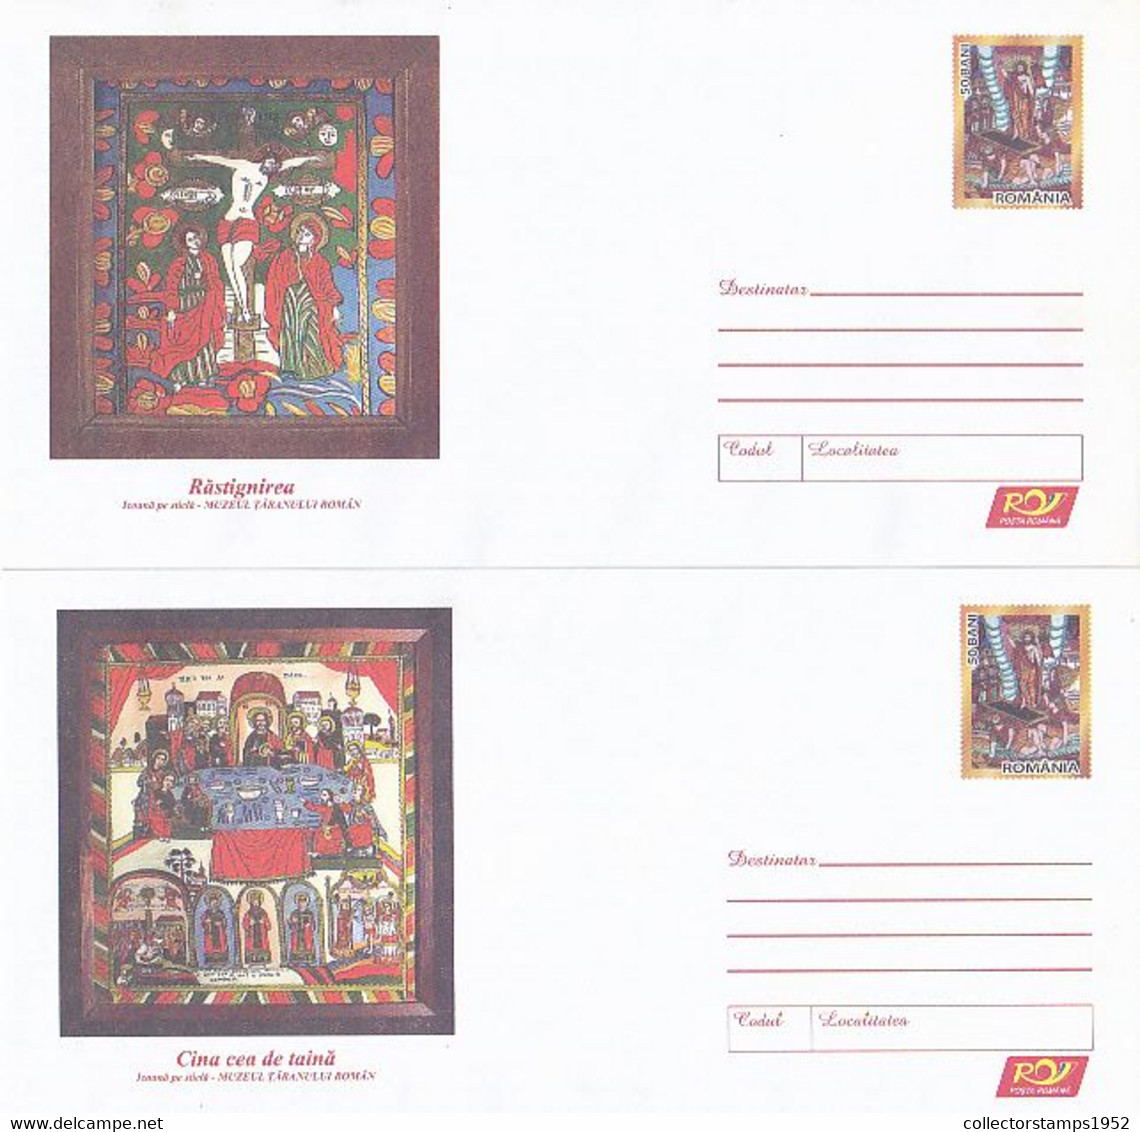 9030FM- JESUS' CRUCIFIXION, LAST SUPPER ICONS, PAINTINGS, RELIGION, COVER STATIONERY, 2X, 2006, ROMANIA - Gemälde